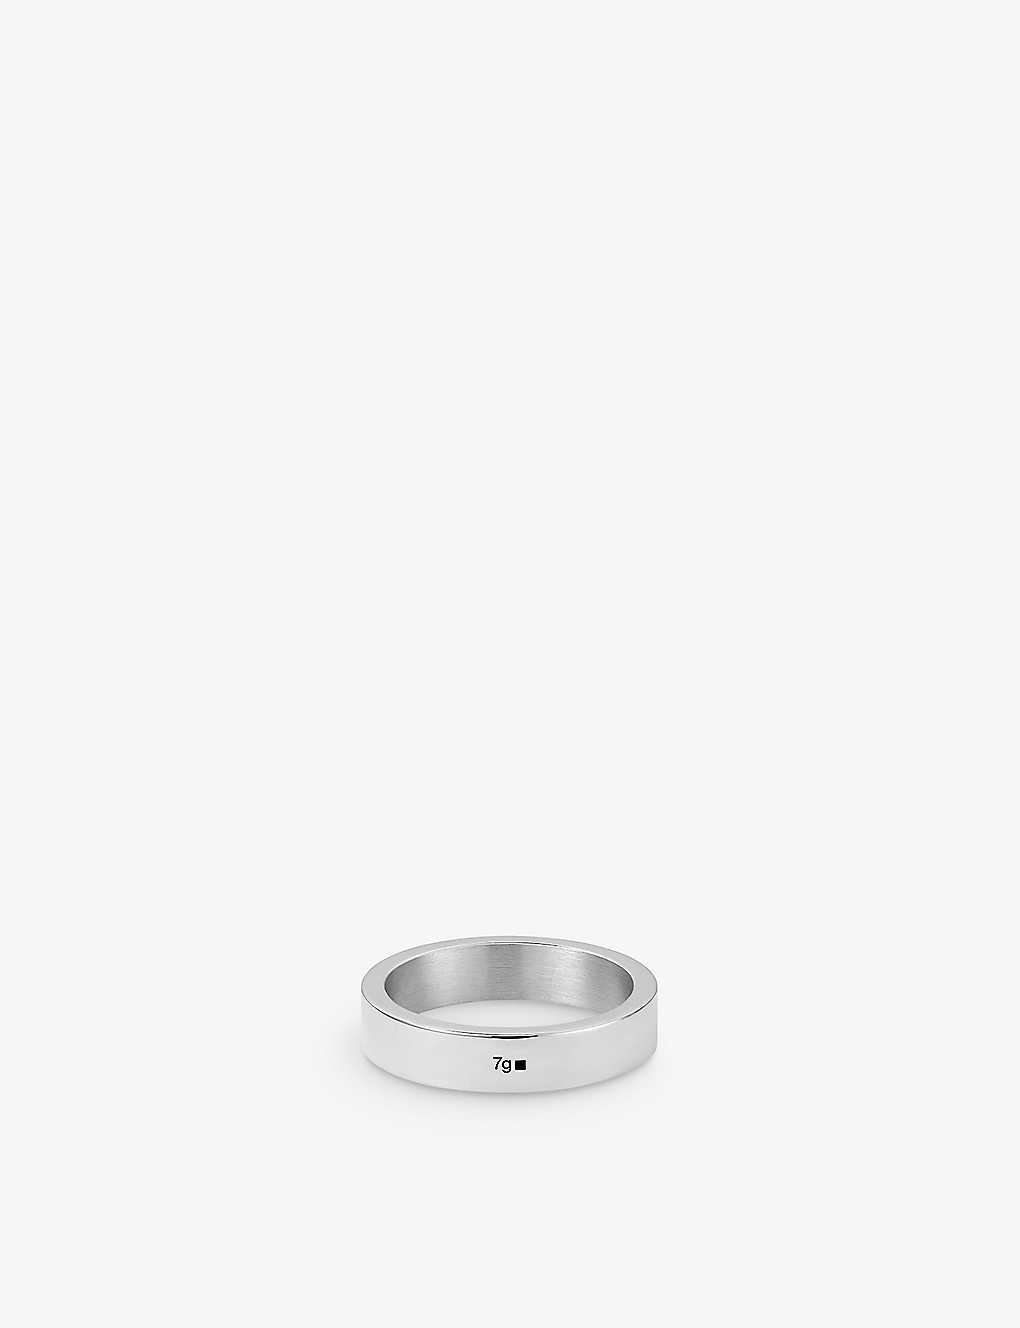 Le Gramme 7g Polished Sterling-silver Ribbon Ring